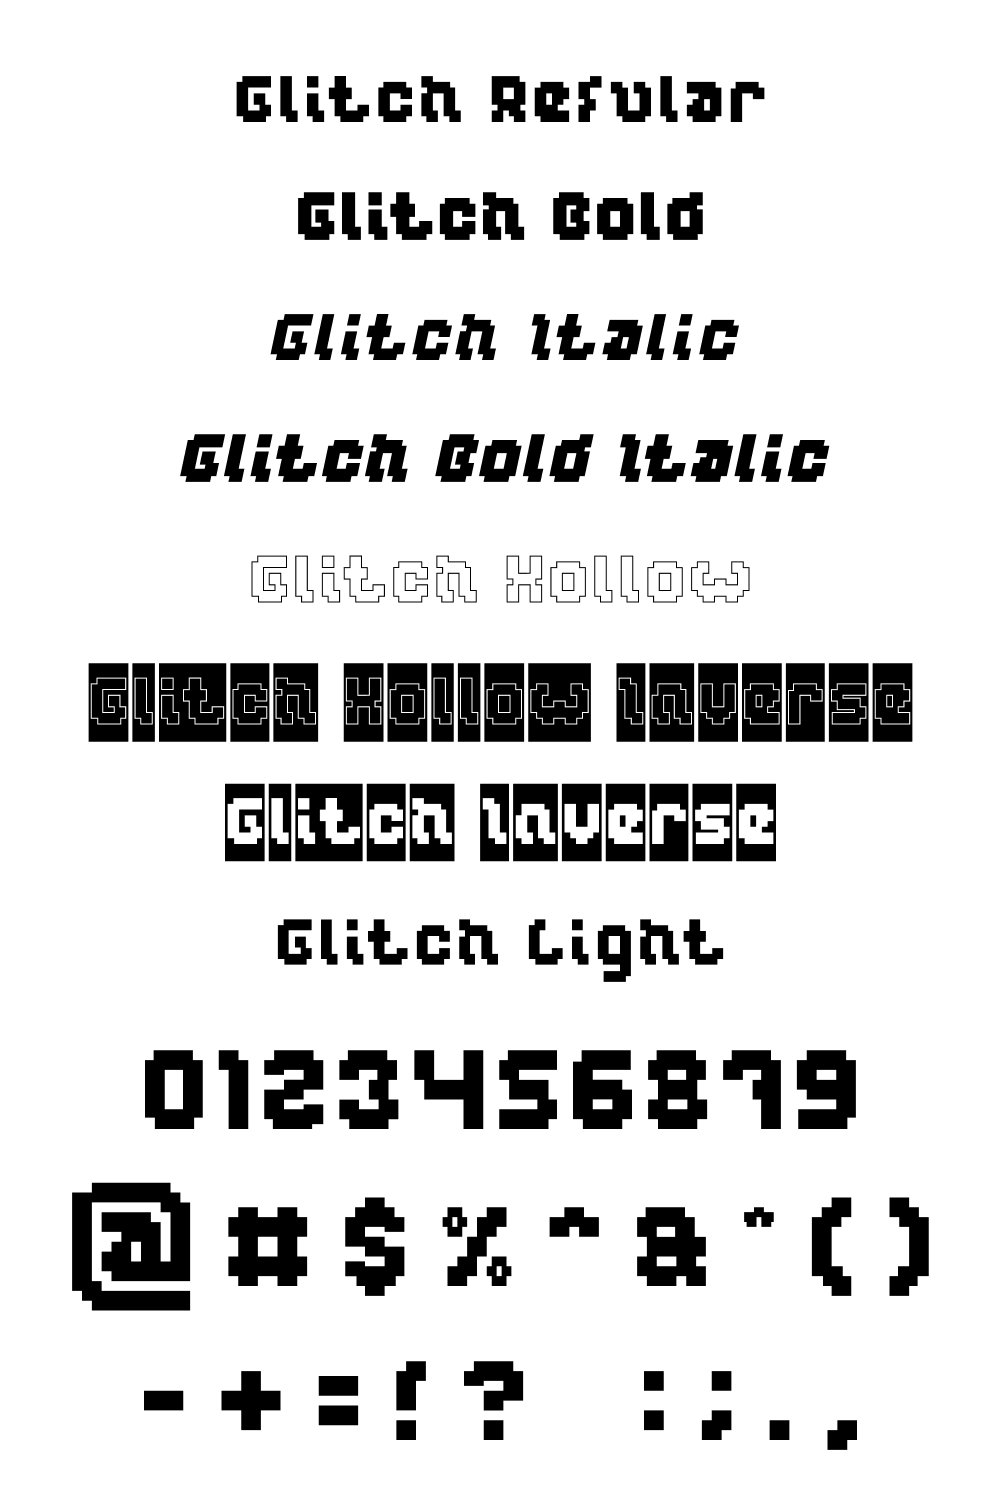 Details and numbers of glitch font.